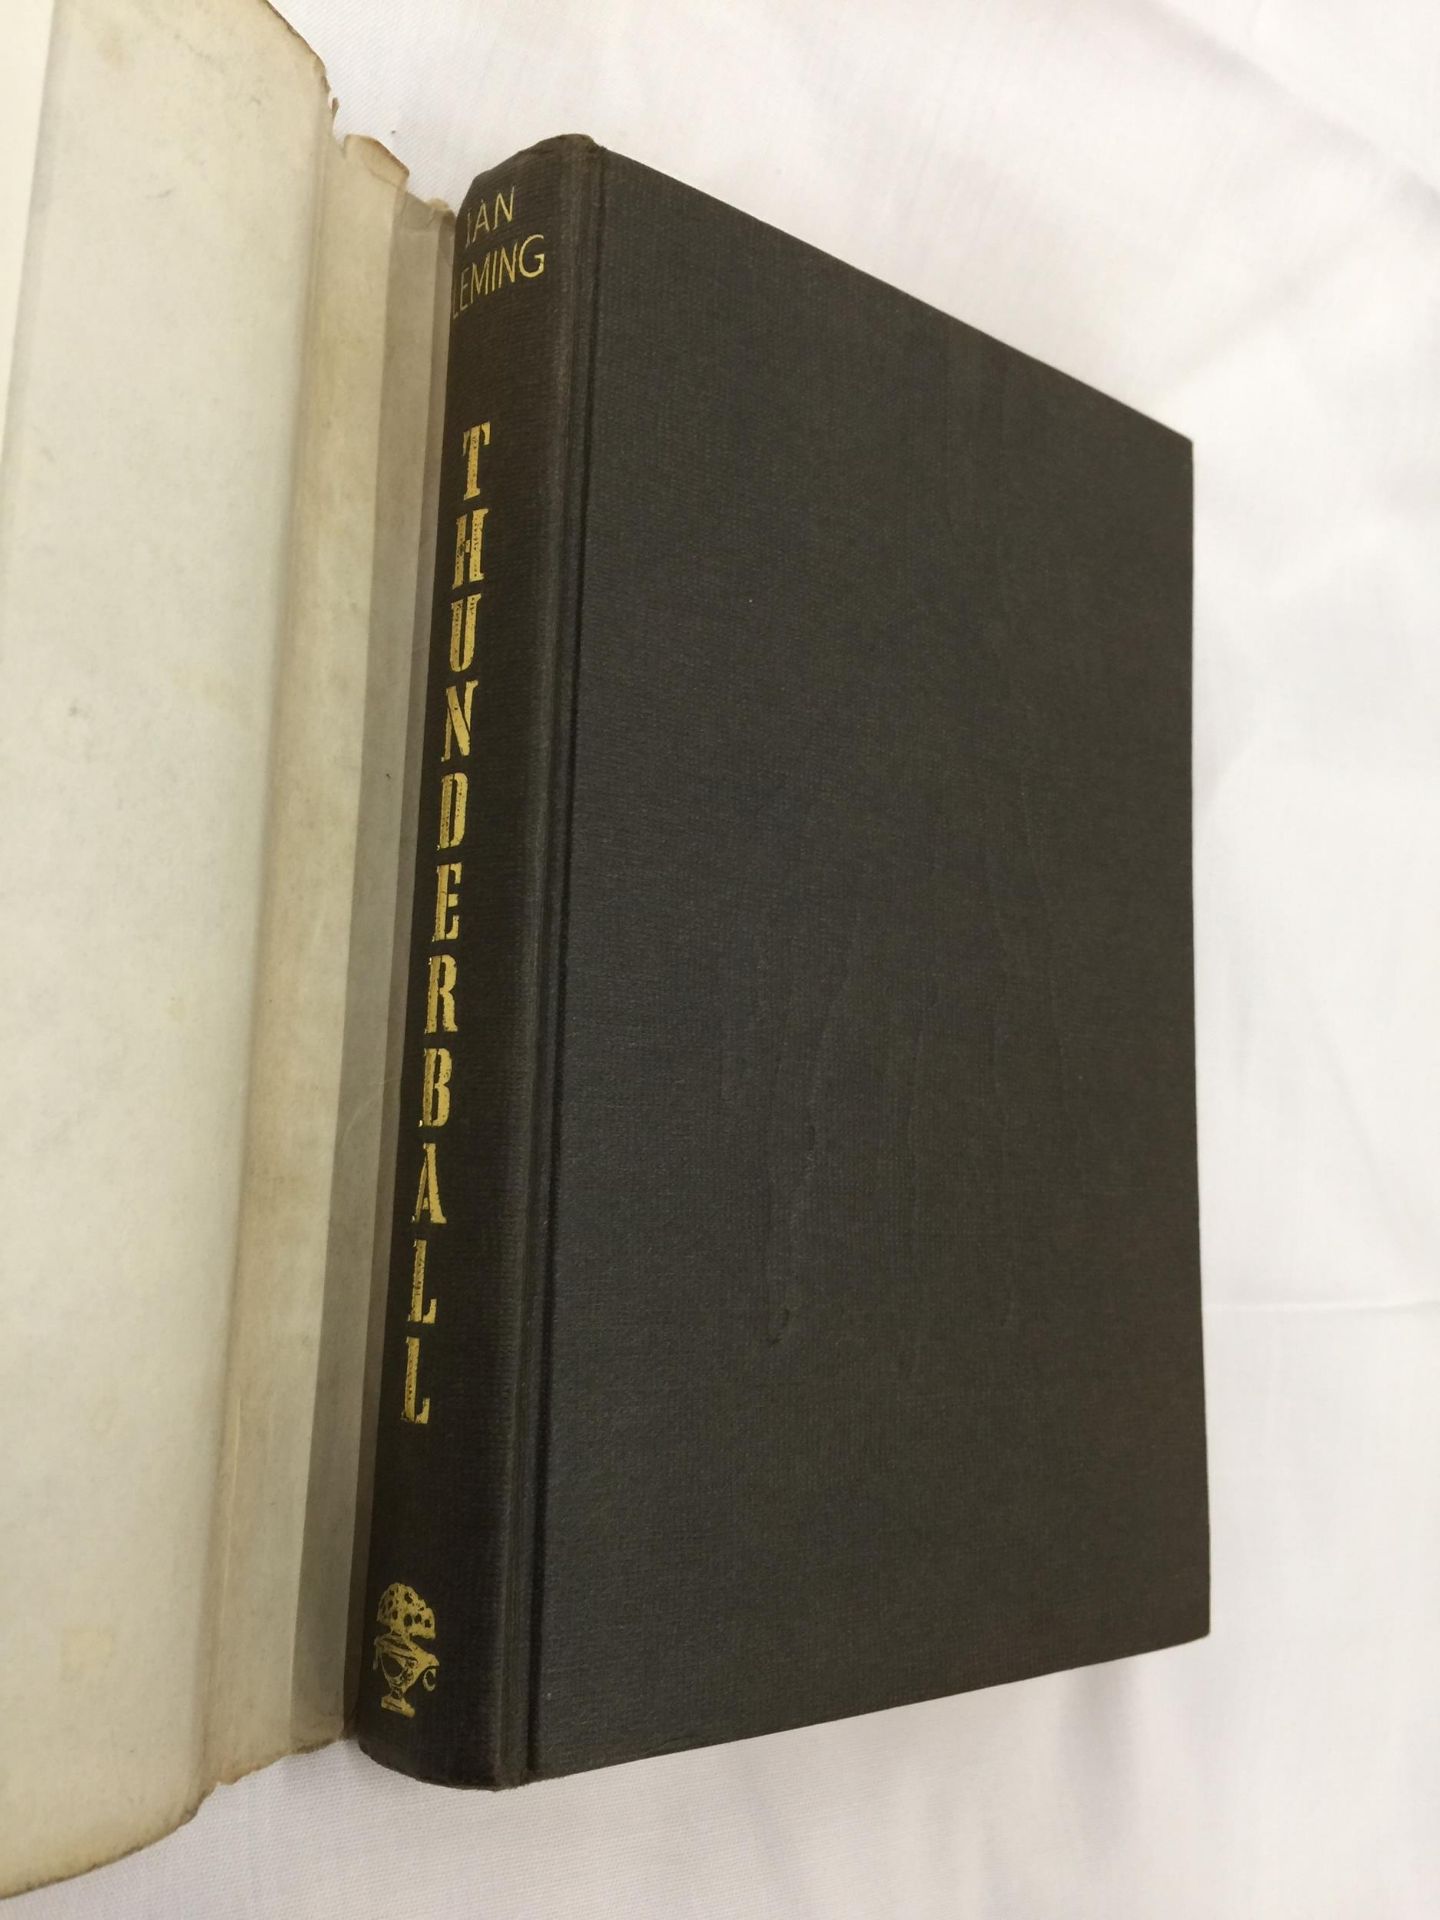 A FIRST EDITION JAMES BOND NOVEL - THUNDERBALL BY IAN FLEMING, HARDBACK WITH ORIGINAL DUST - Image 6 of 12